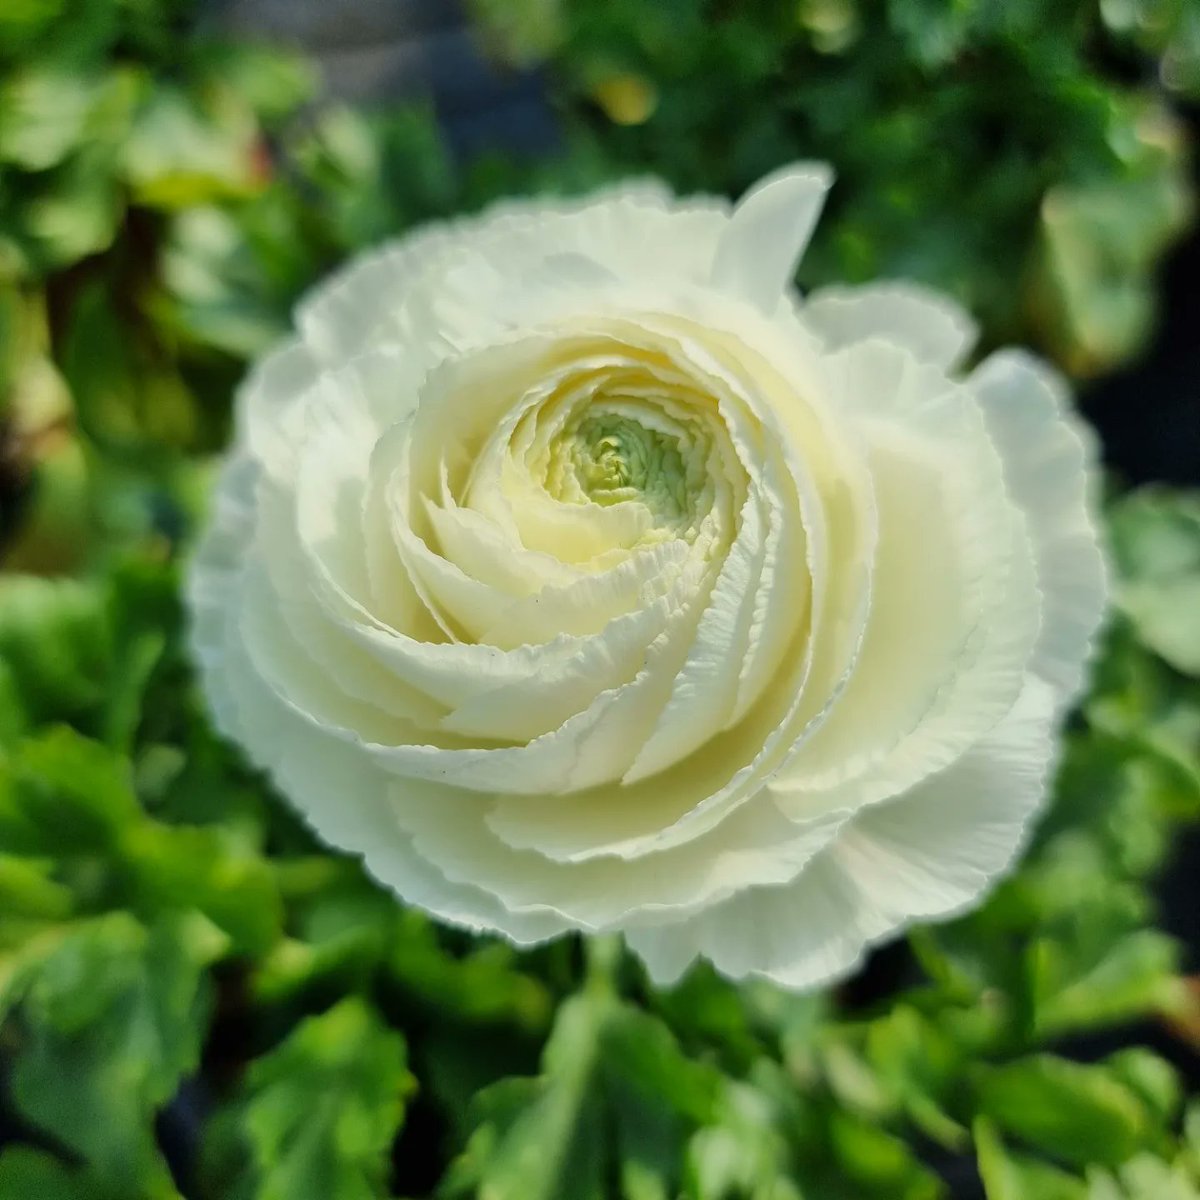 Ranunculus flowers are so pretty, we've grown some lovely plants in available in 13cm pots for £1.99 each, but if you buy 3 or more they are just £1.49 each 🔍 Find us on the A149 near Stalham ☎️ Call us on 01692 580226 🖱 agmeale.co.uk #ranunculus